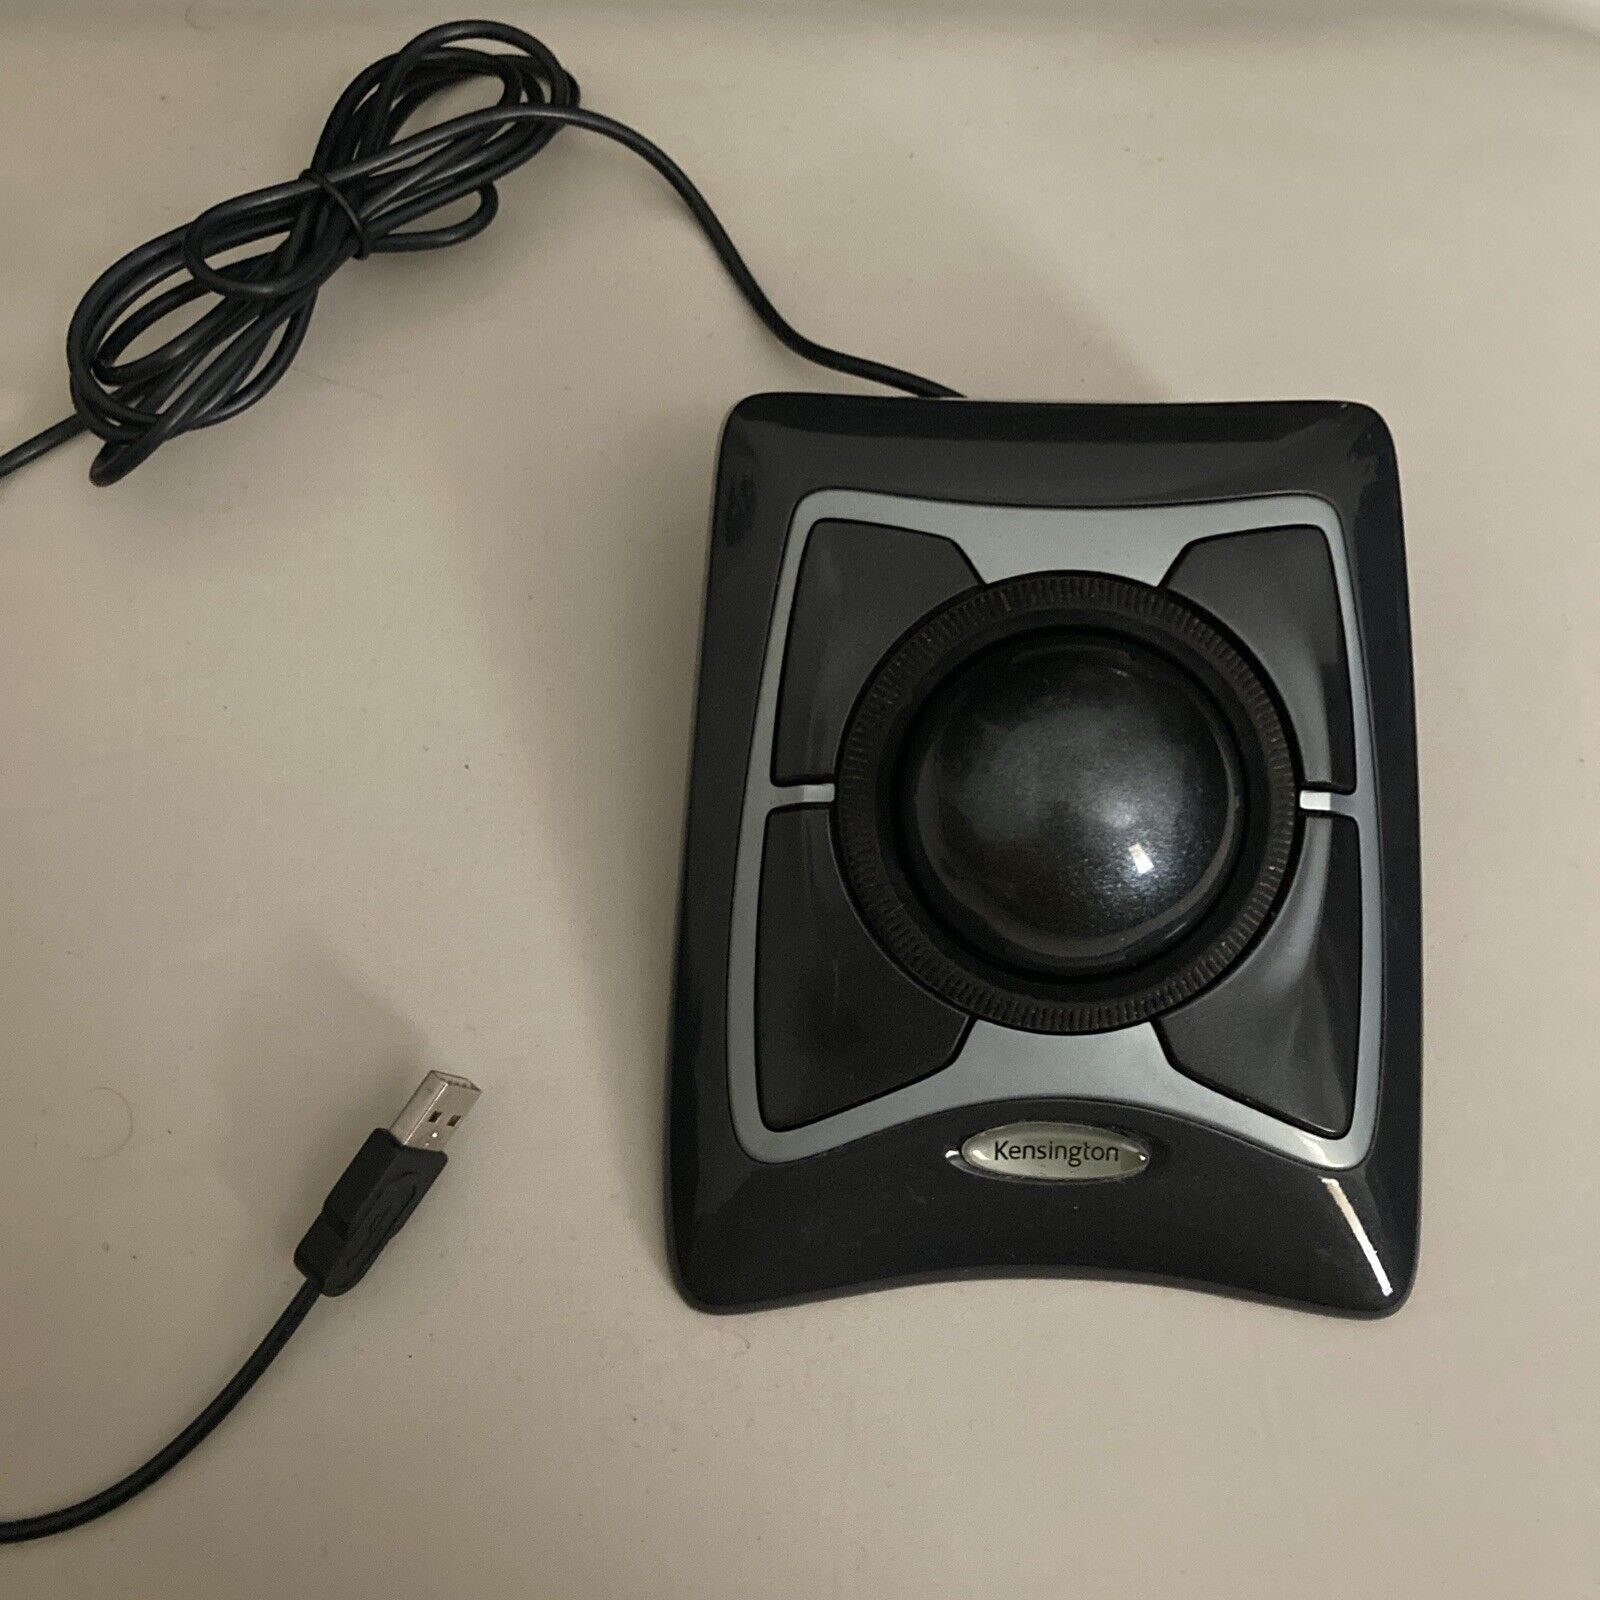 Kensington Expert Trackball Mouse - Black Silver (K64325) Tested And Working